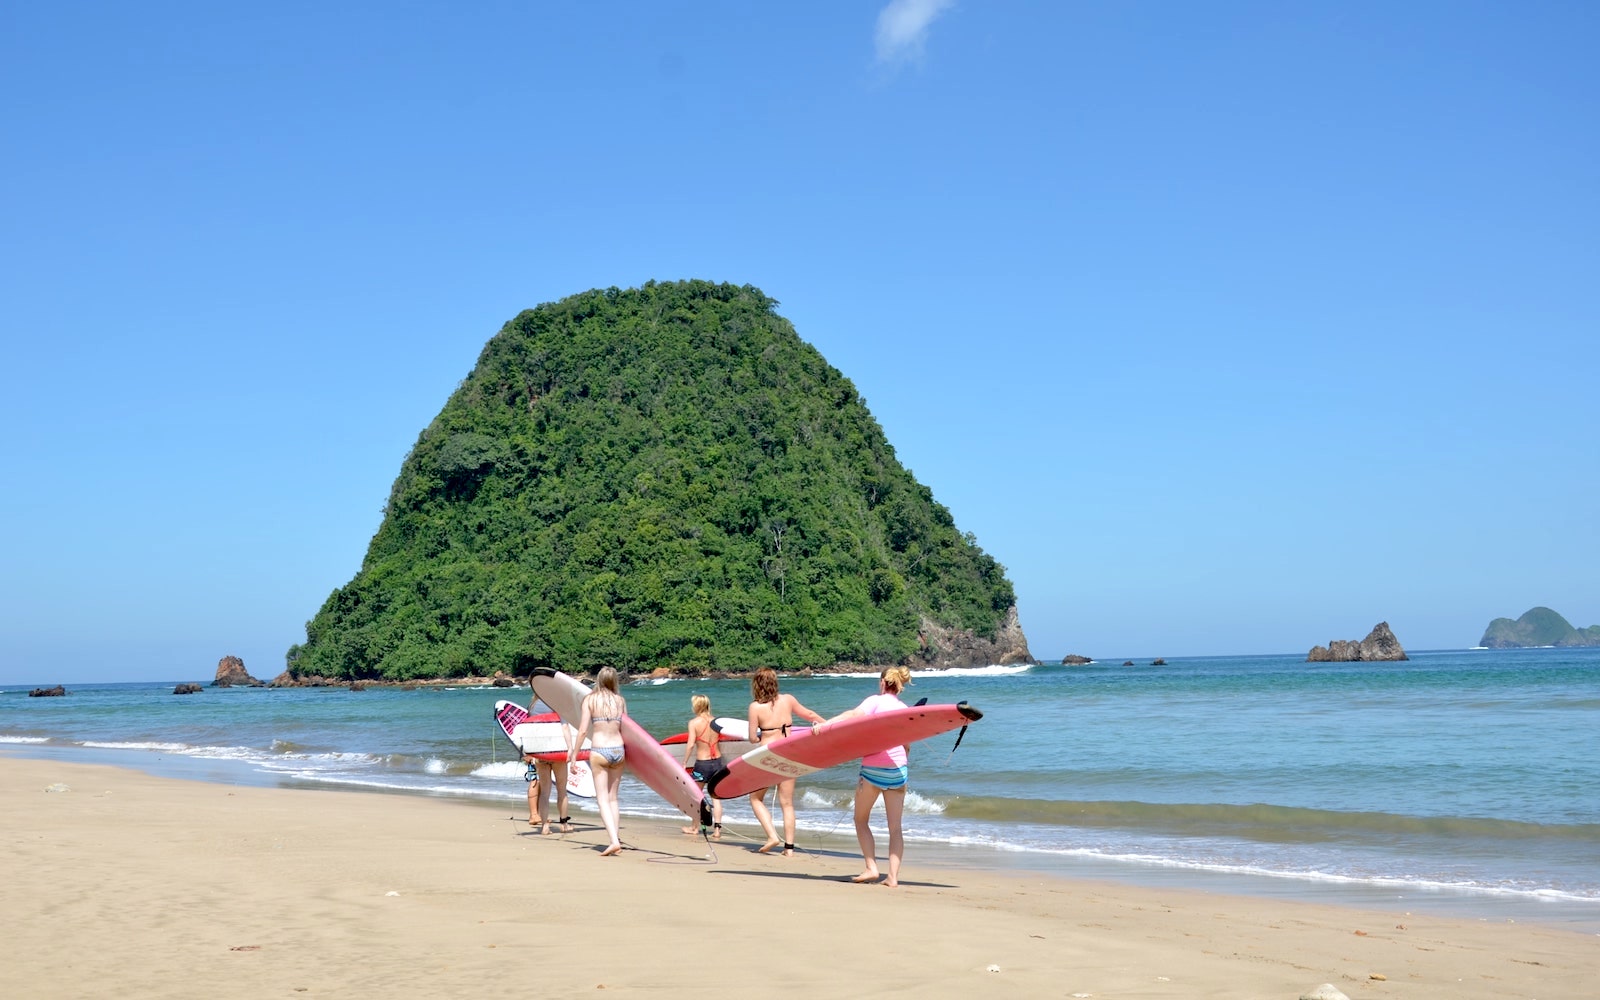 Surfing at remote island escape at Red Island, Java